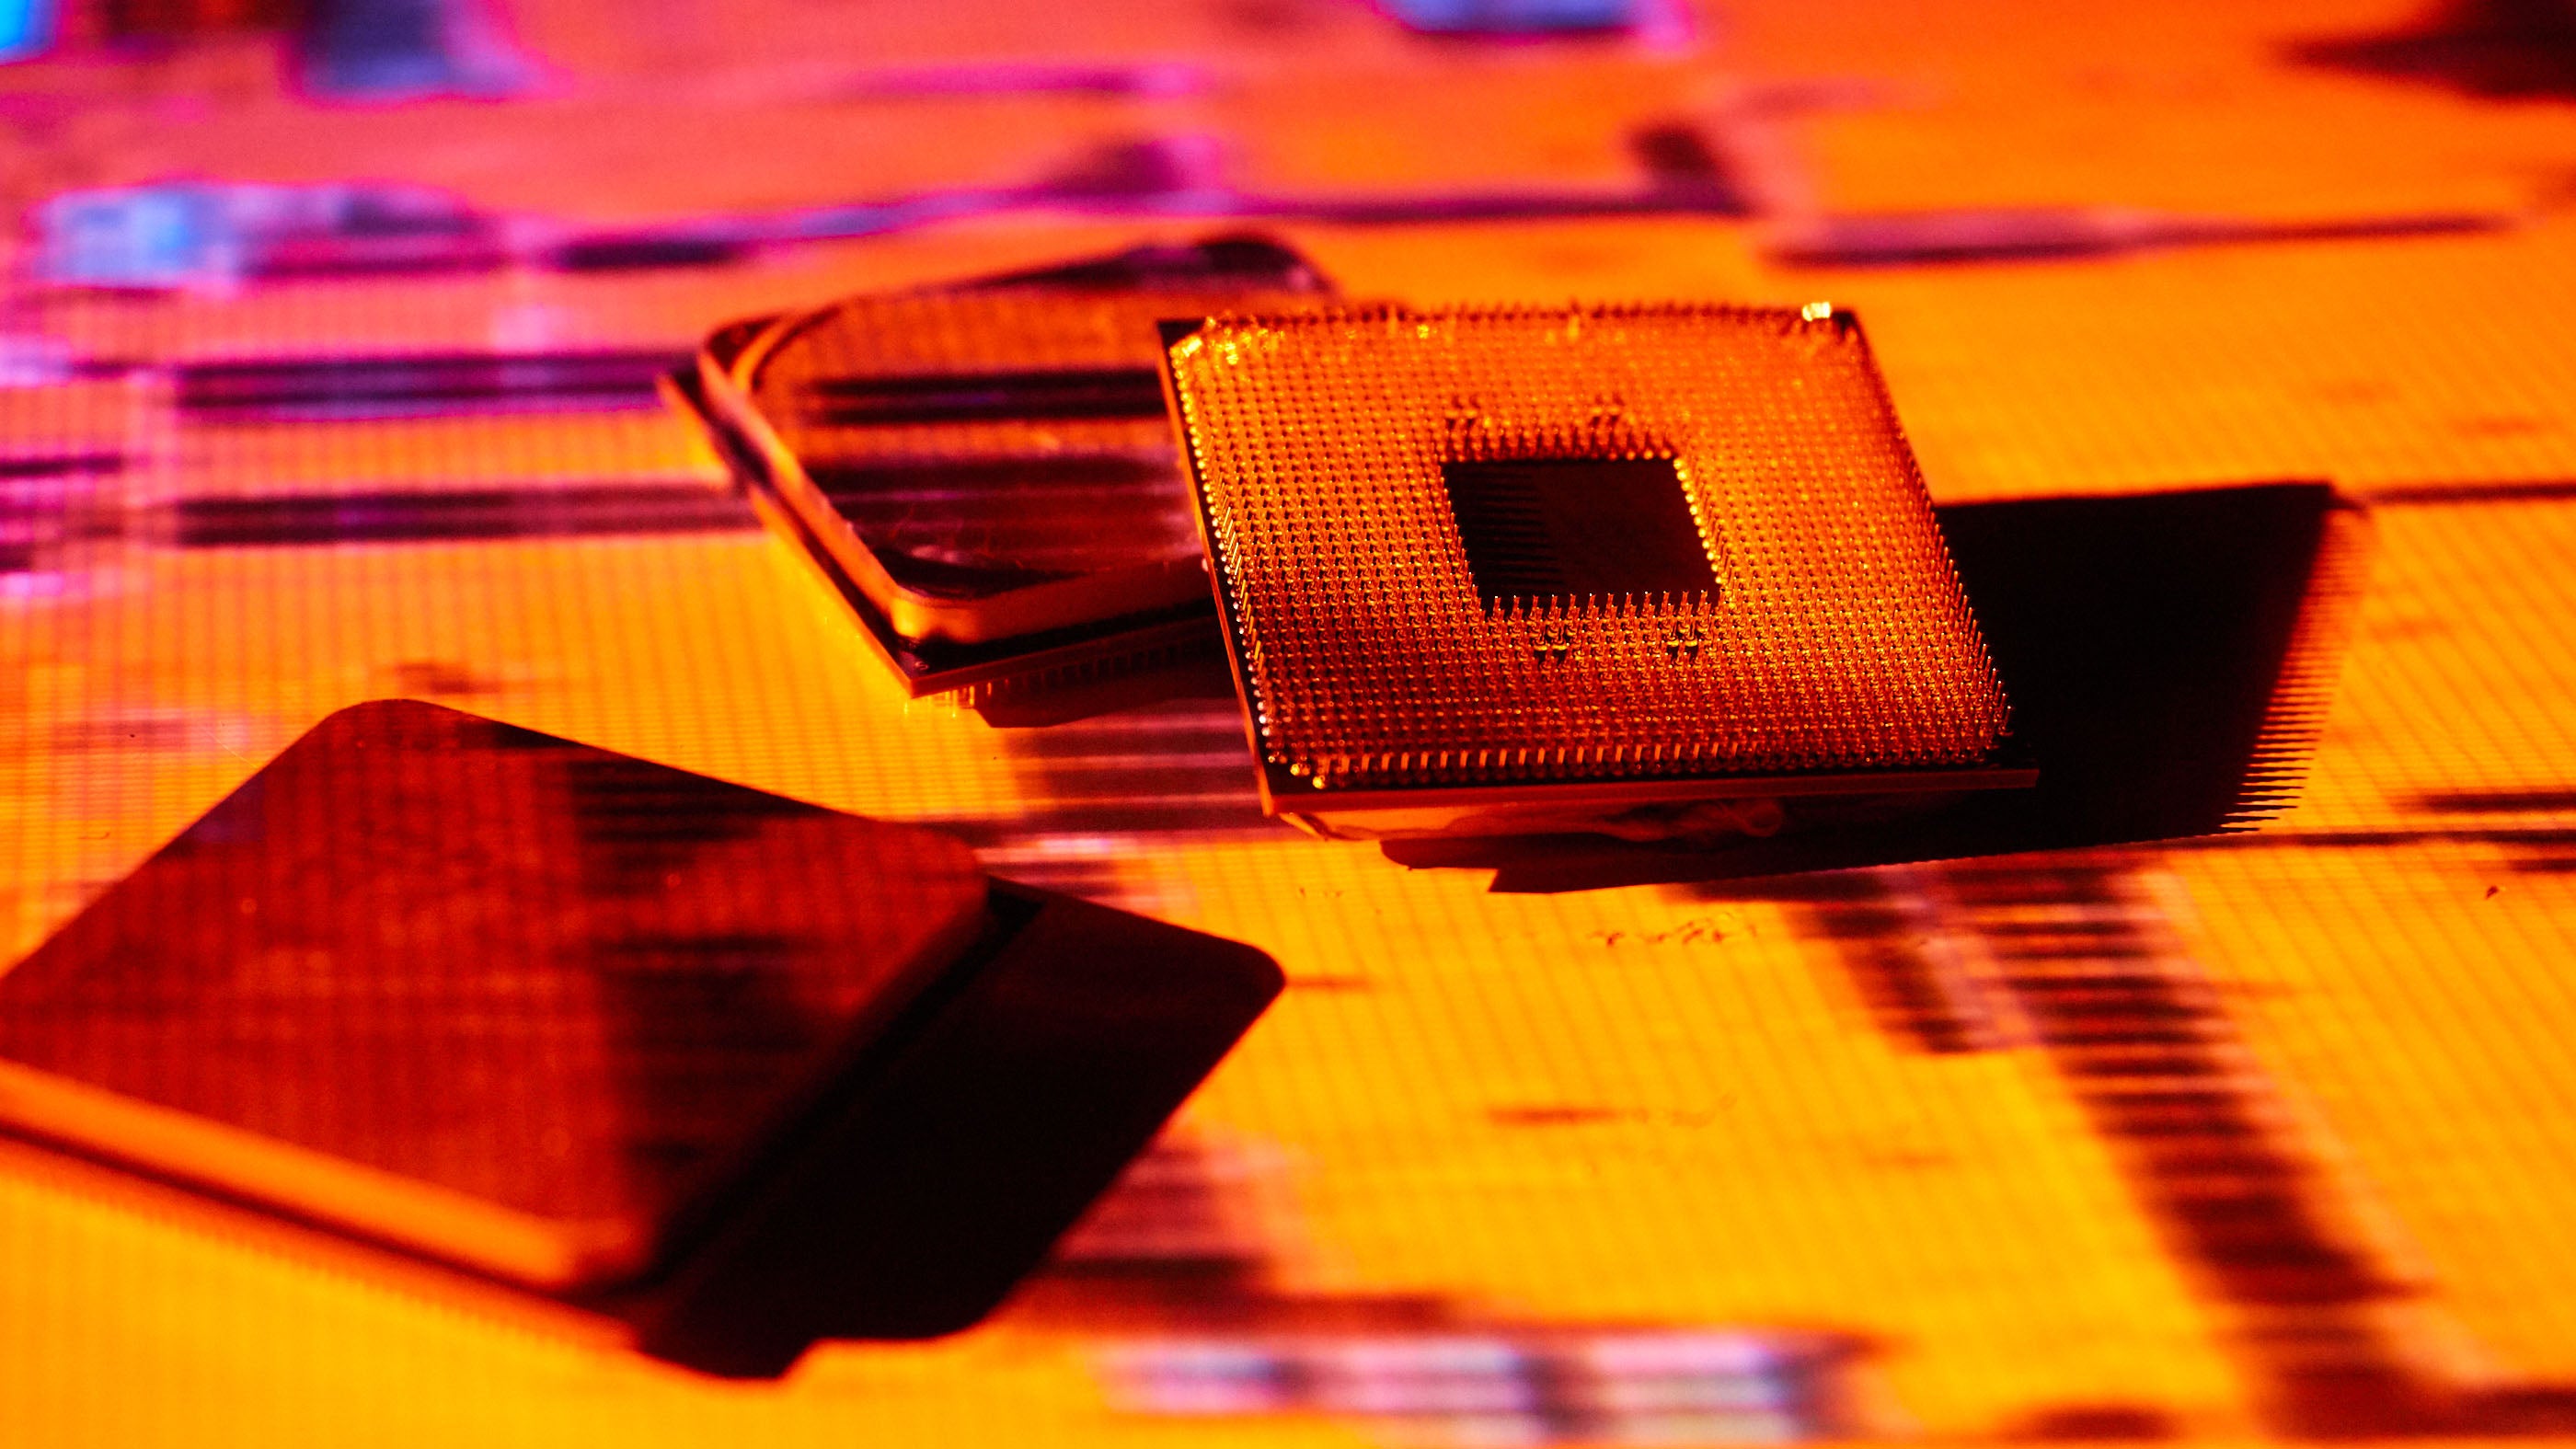 Processor Makers Confirm New Security Flaws, So Update Now